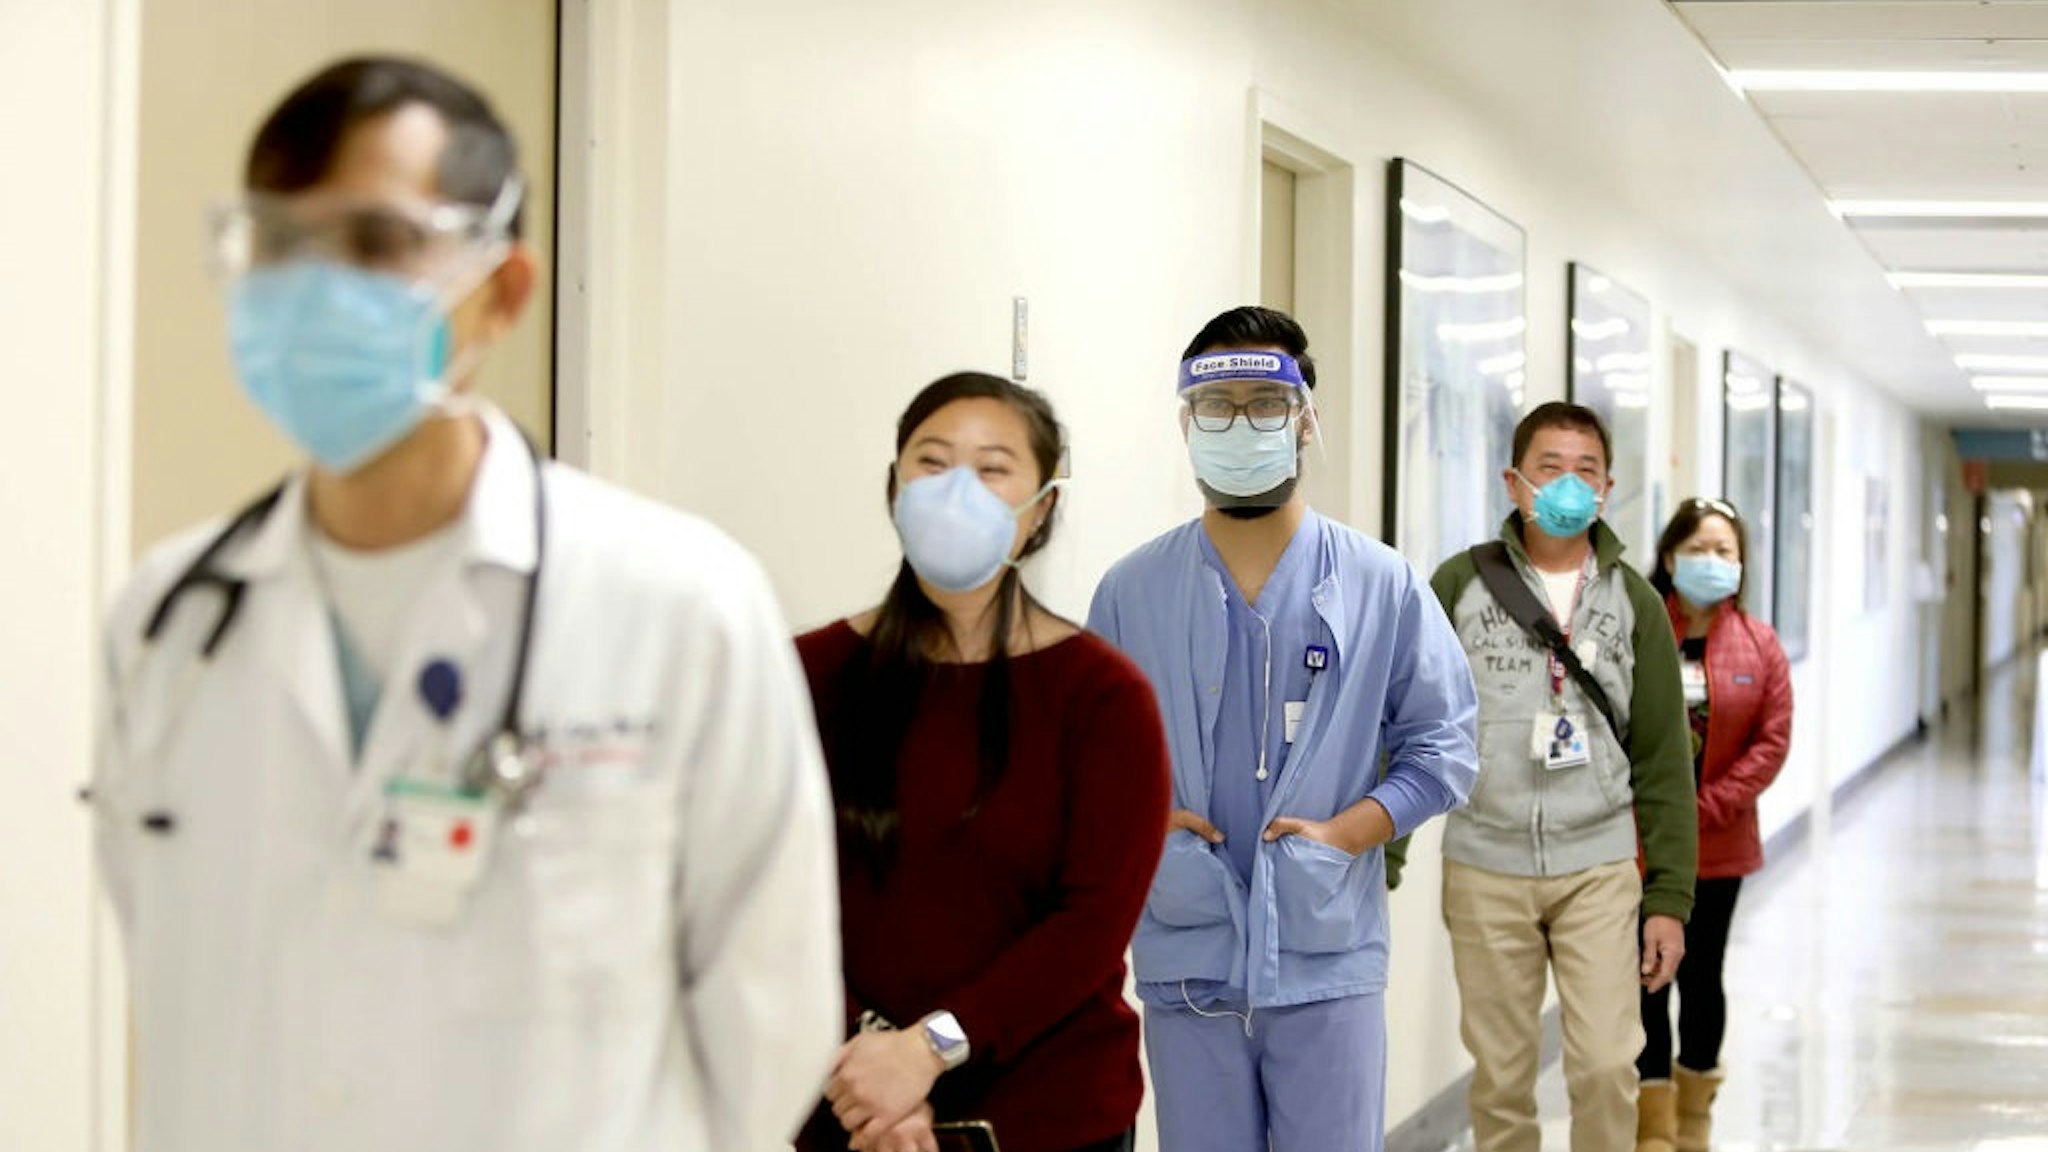 DALY CITY, CA - DEC. 21: Donning a mask and face shield, Roman Romo, center, waits in line with other staff members to receive a coronavirus vaccine at Seton Medical Center on Monday, December 21, 2020, in Daly City, Calif.